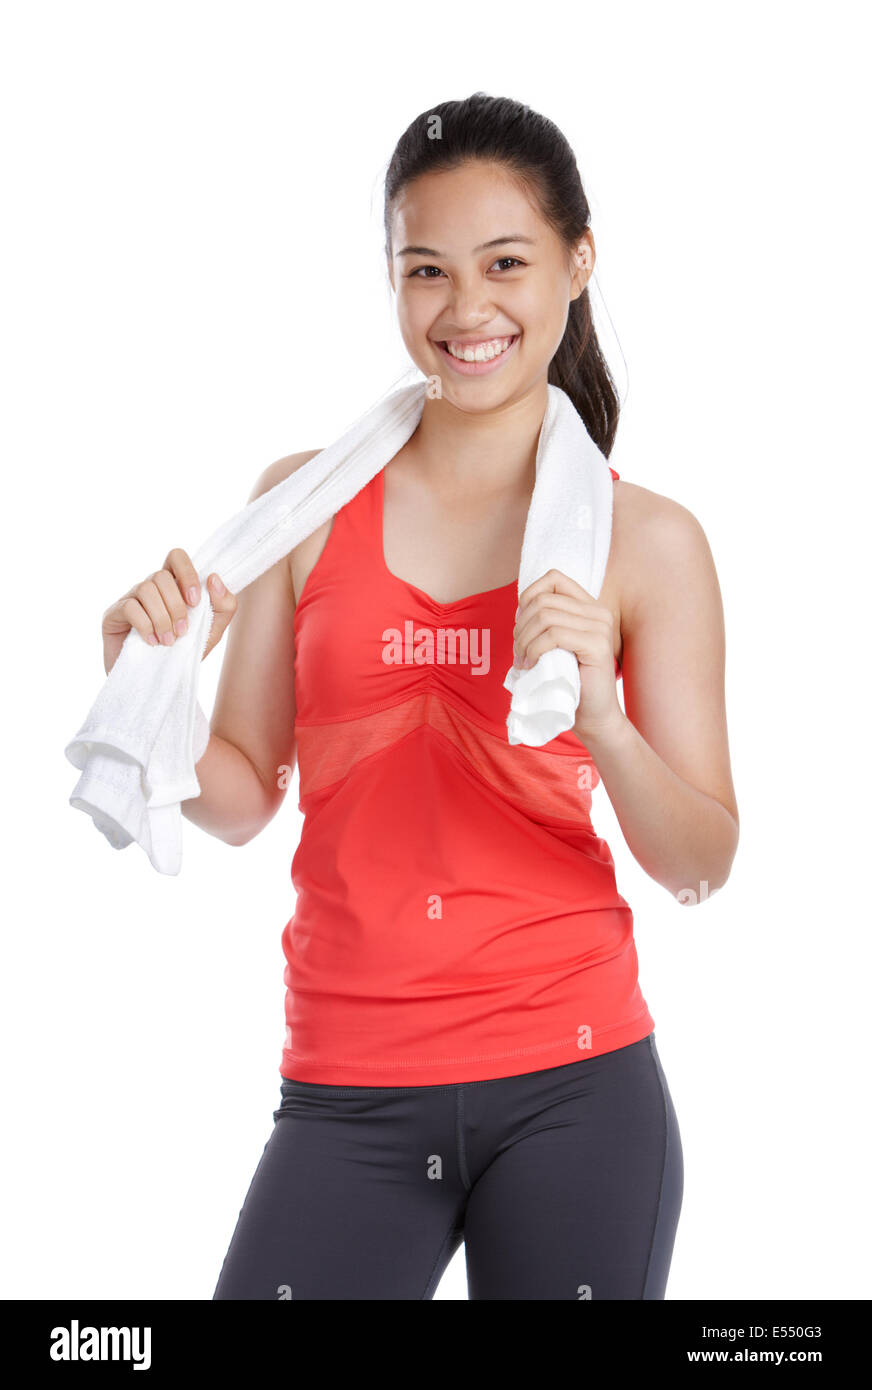 cheerful fitness girl holding a towel around her neck Stock Photo